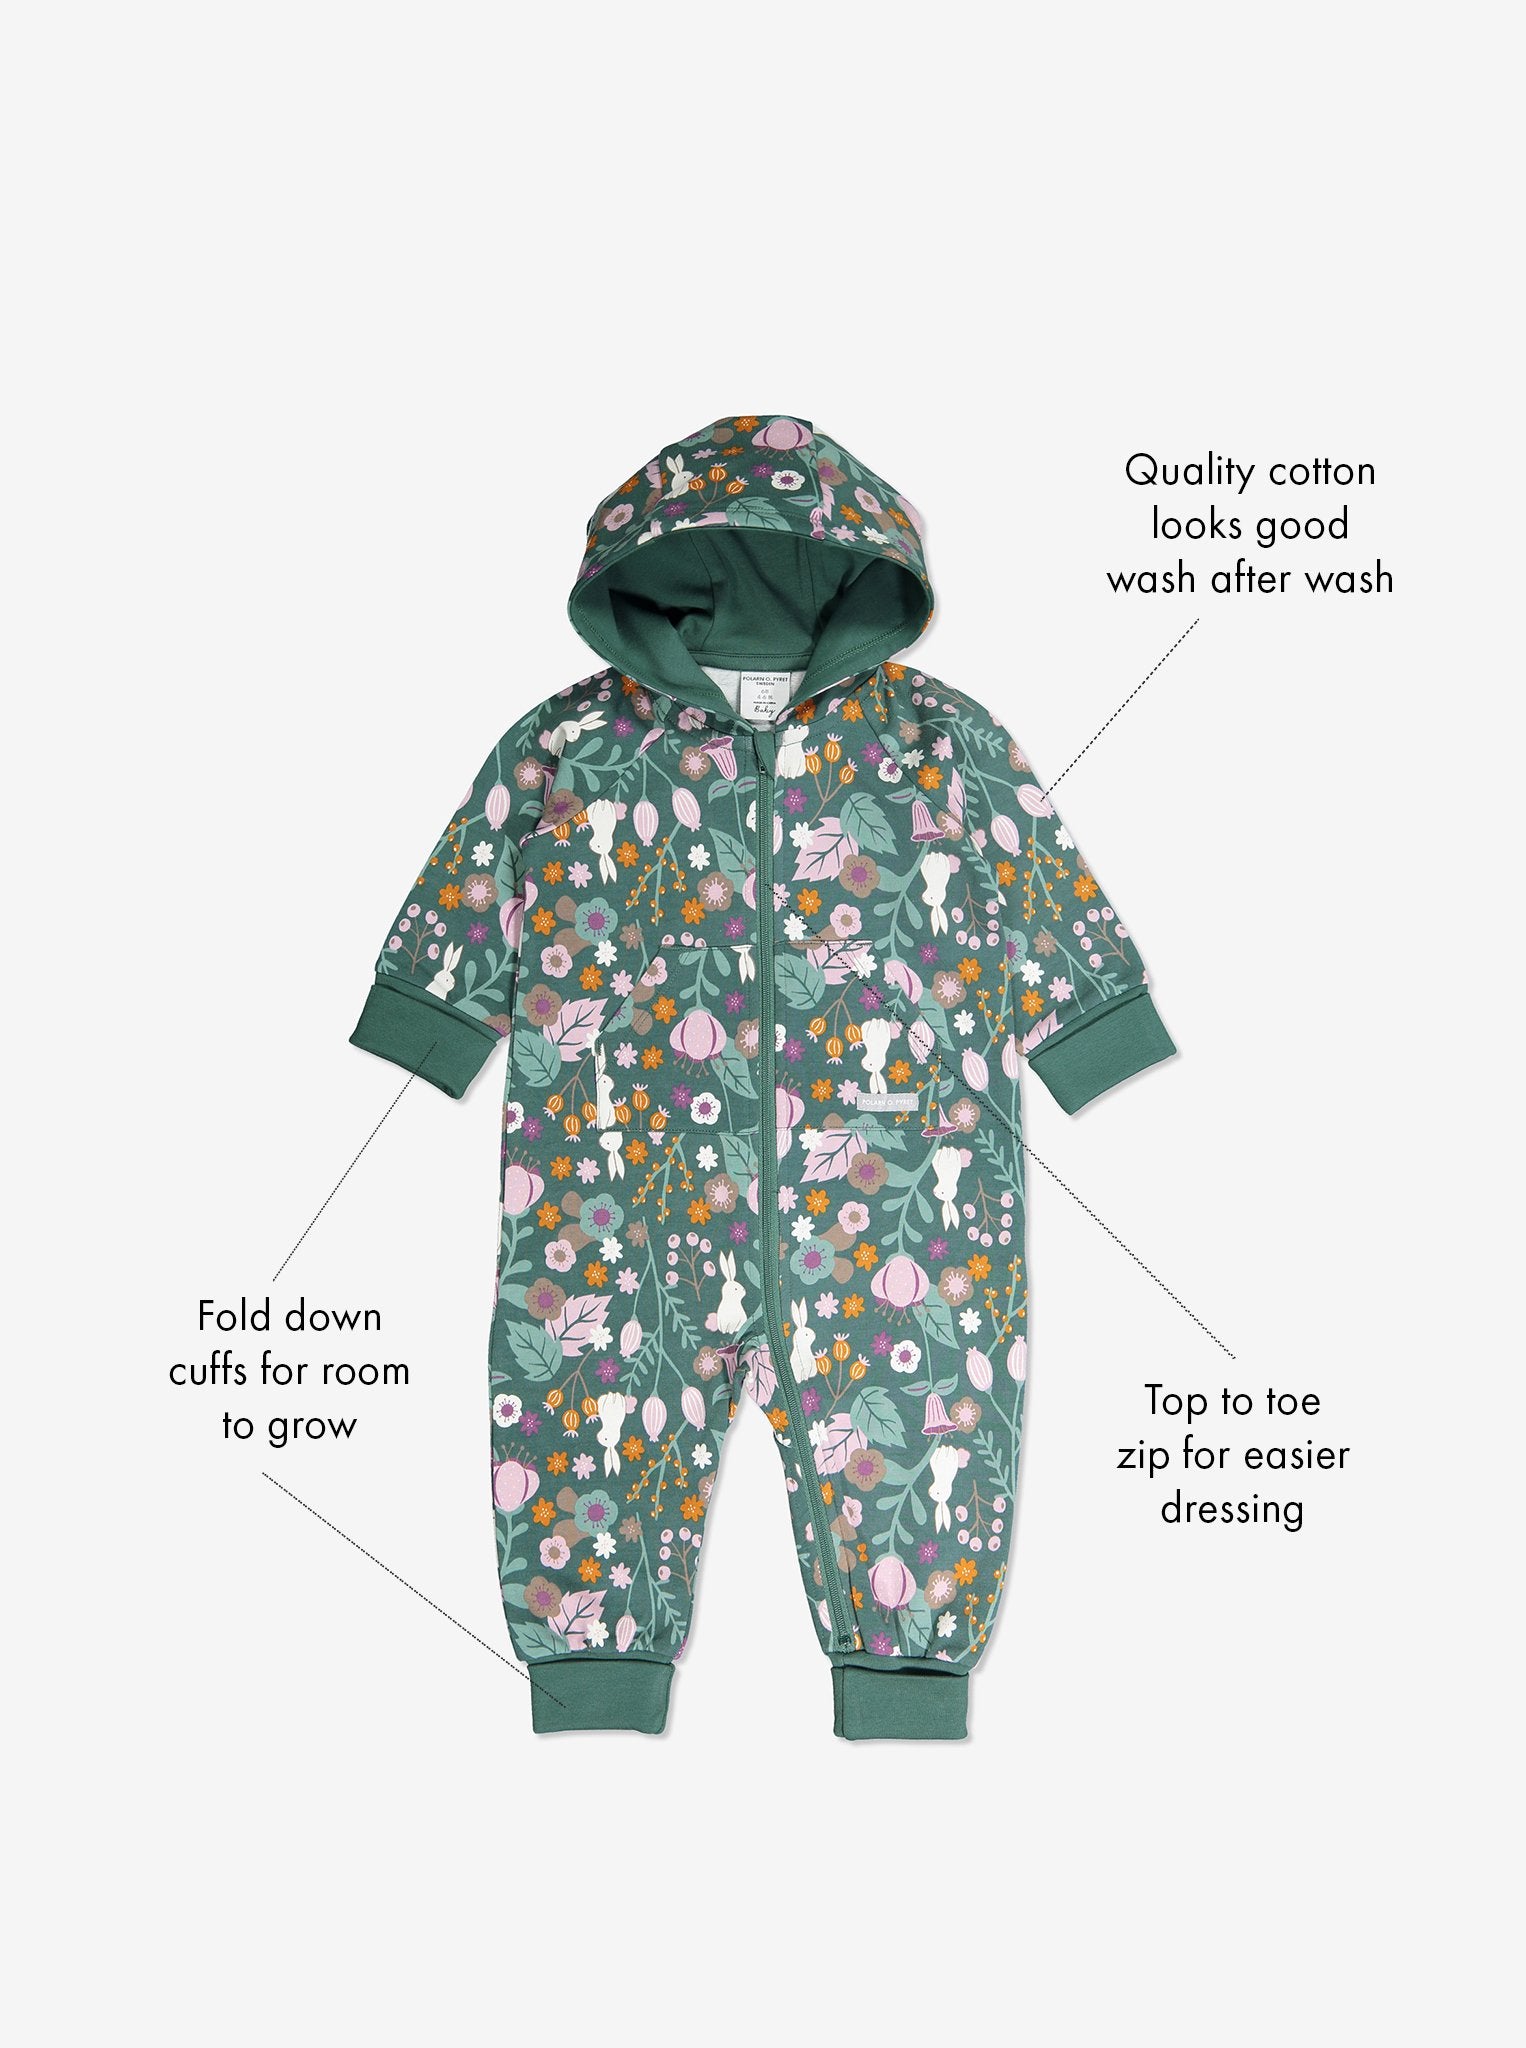 GOTS organic cotton baby all-in-one in a woodland print with text labels shown on the sides